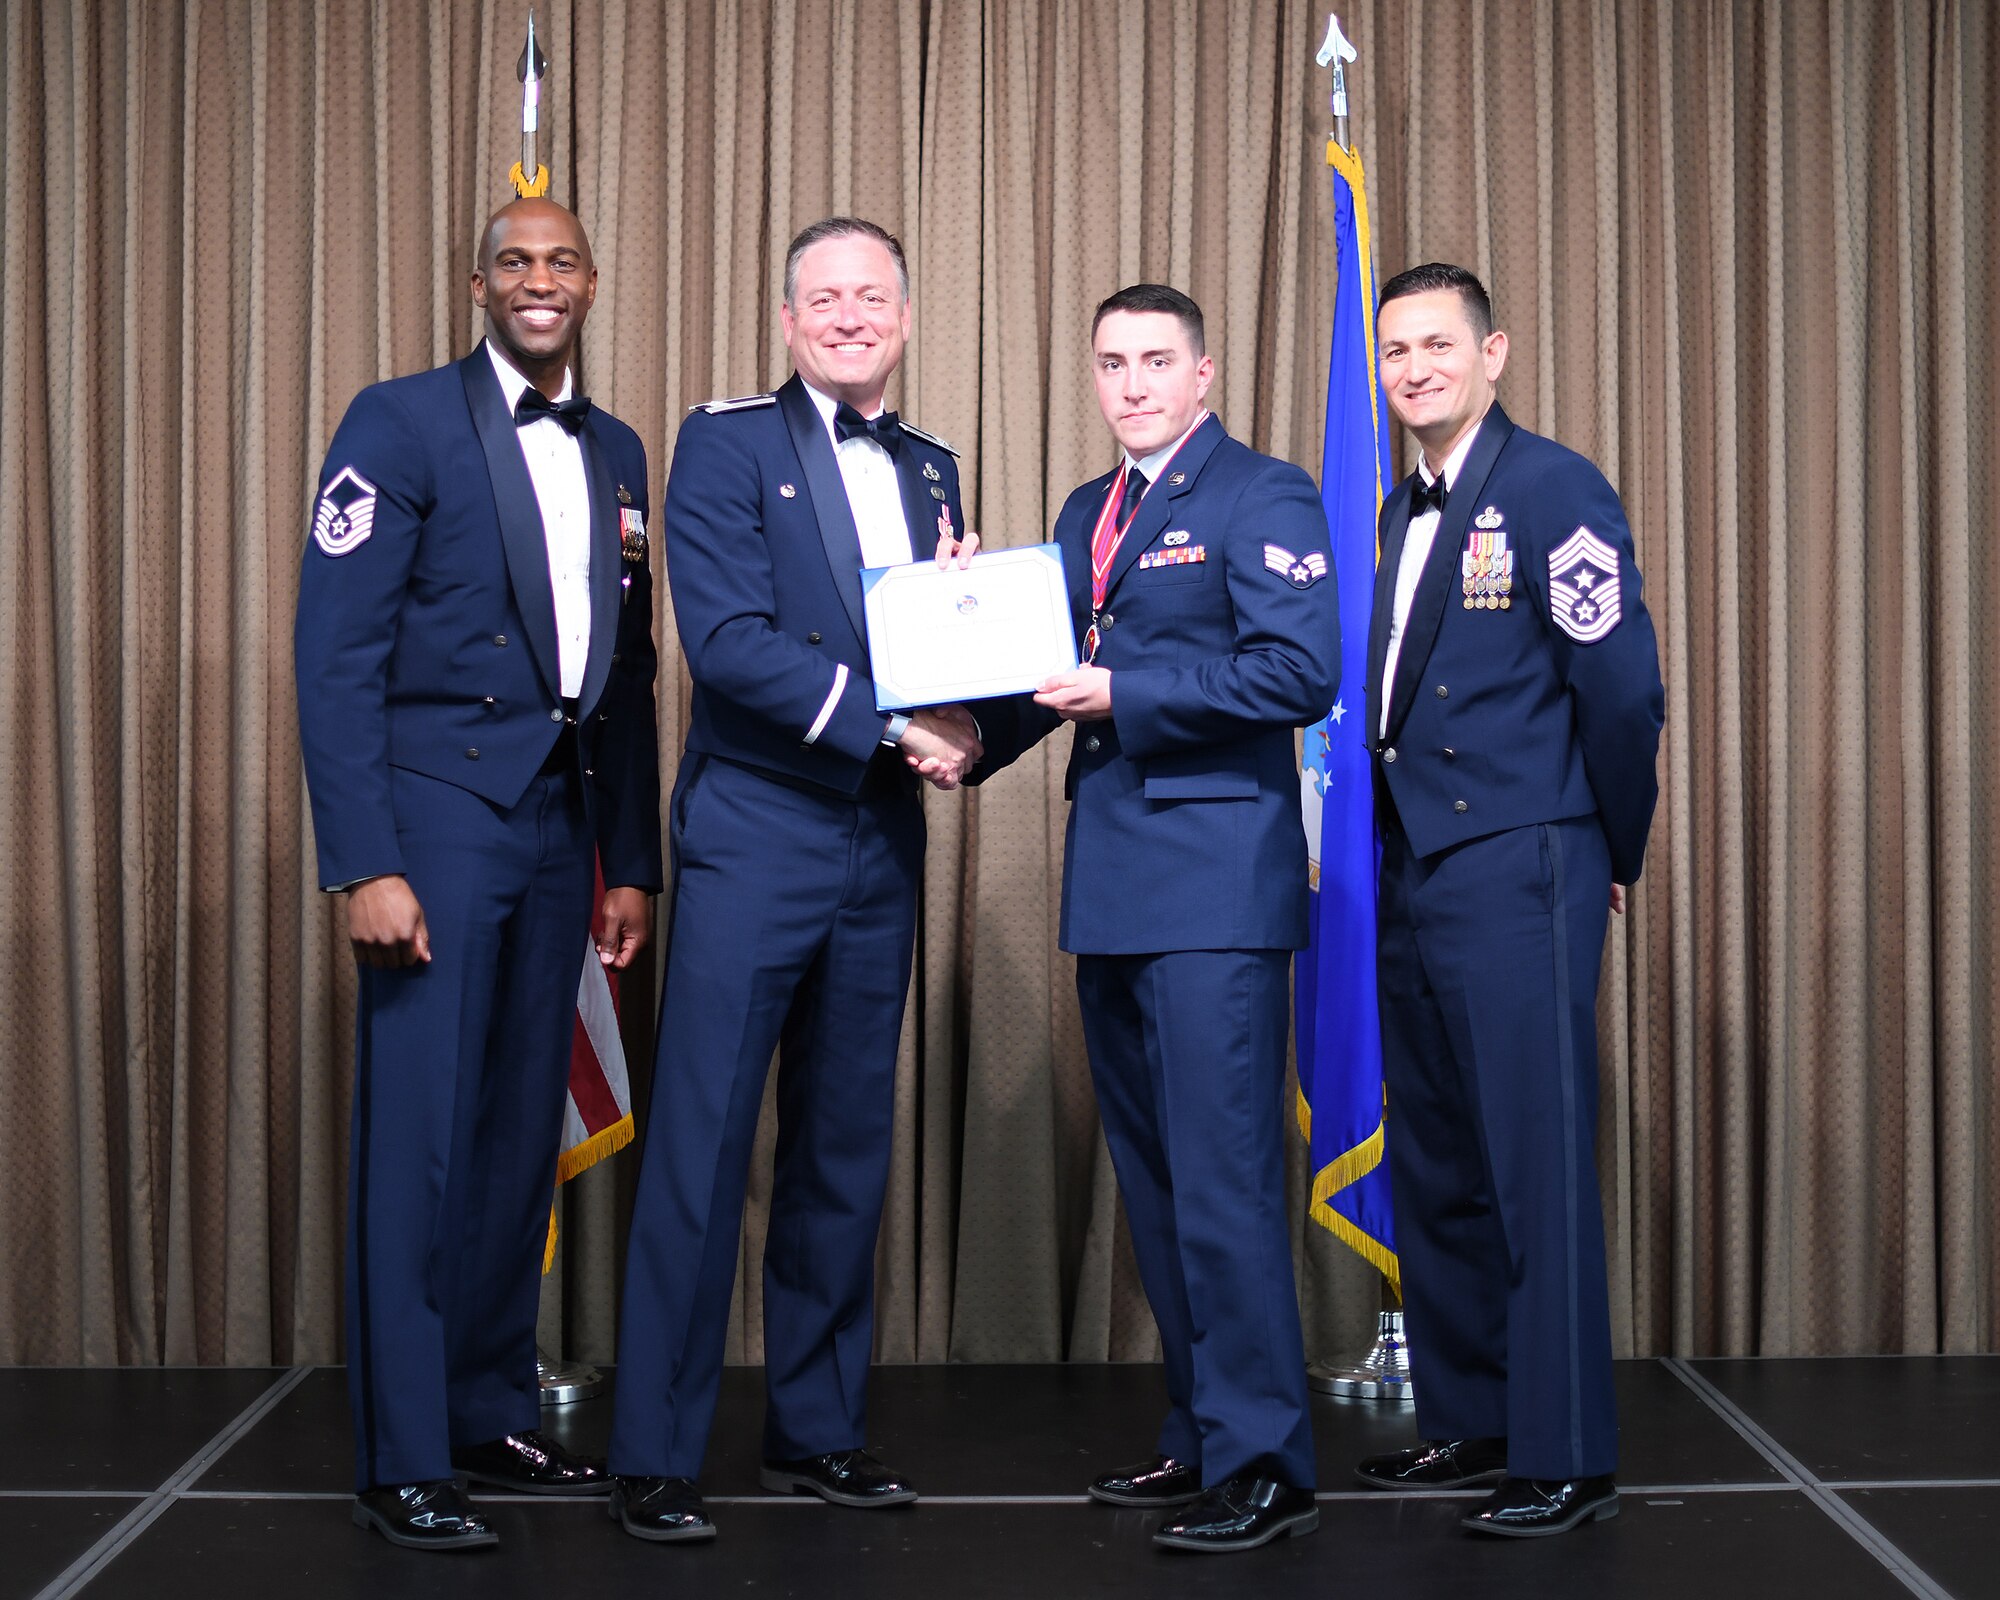 Col. Benjamin Spencer, 319th Air Base Wing commander, presents diploma to SrA Anthony Coronato, Etchberger Airman Leadership School graduate, June 20, 2019, on Grand Forks Air Force Base, North Dakota.ALS graduation is the culmination of the first level of the Enlisted Professional Military Education continuum directed toward preparing upcoming noncommissioned officers with leadership skills for their careers. (U.S. Air Force photo by Senior Airman Elijaih Tiggs)